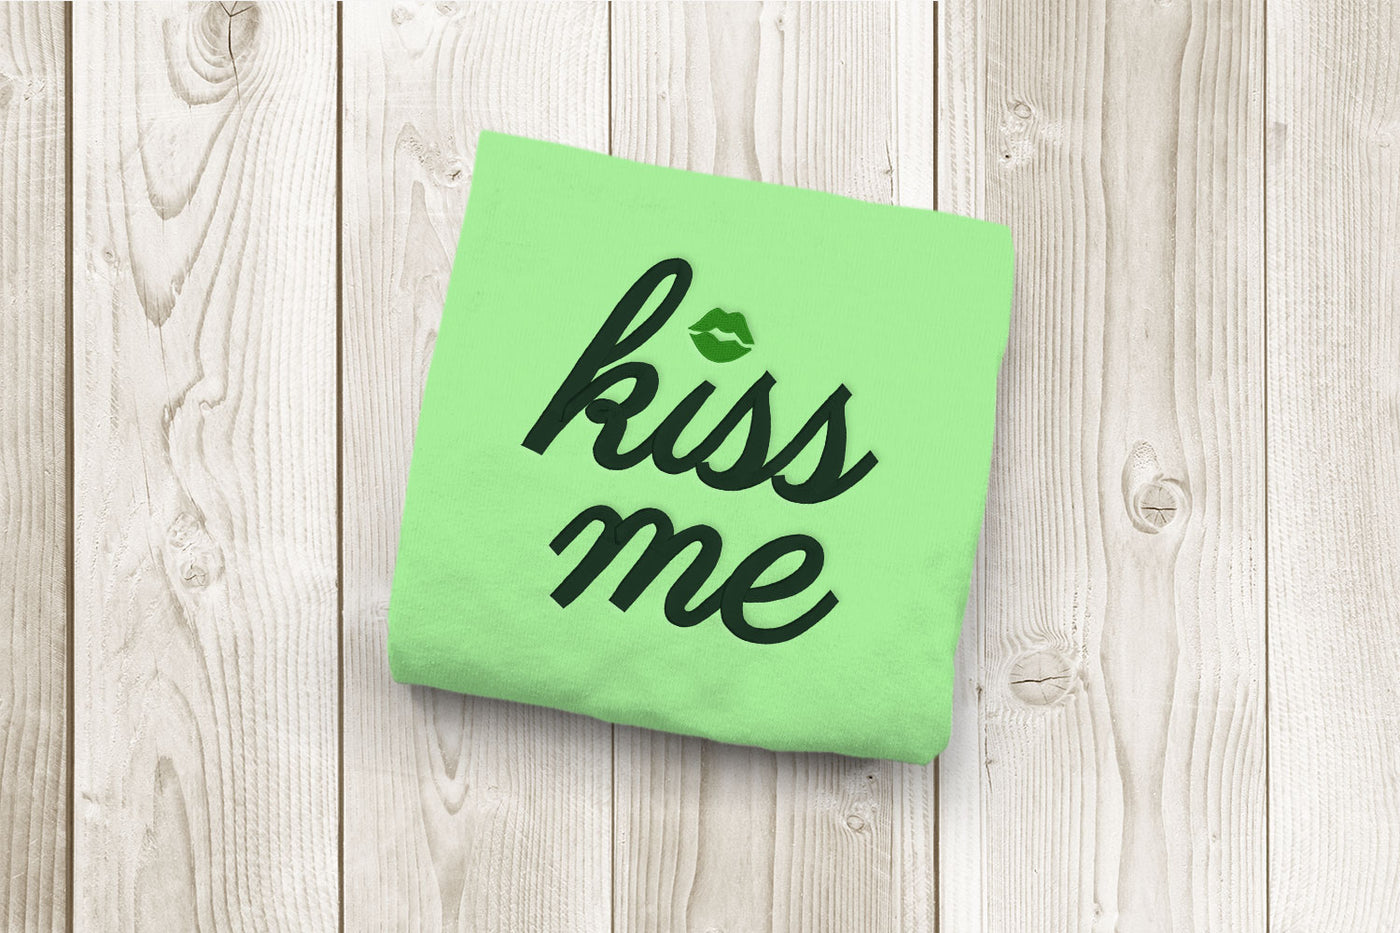 Kiss me embroidery with lips